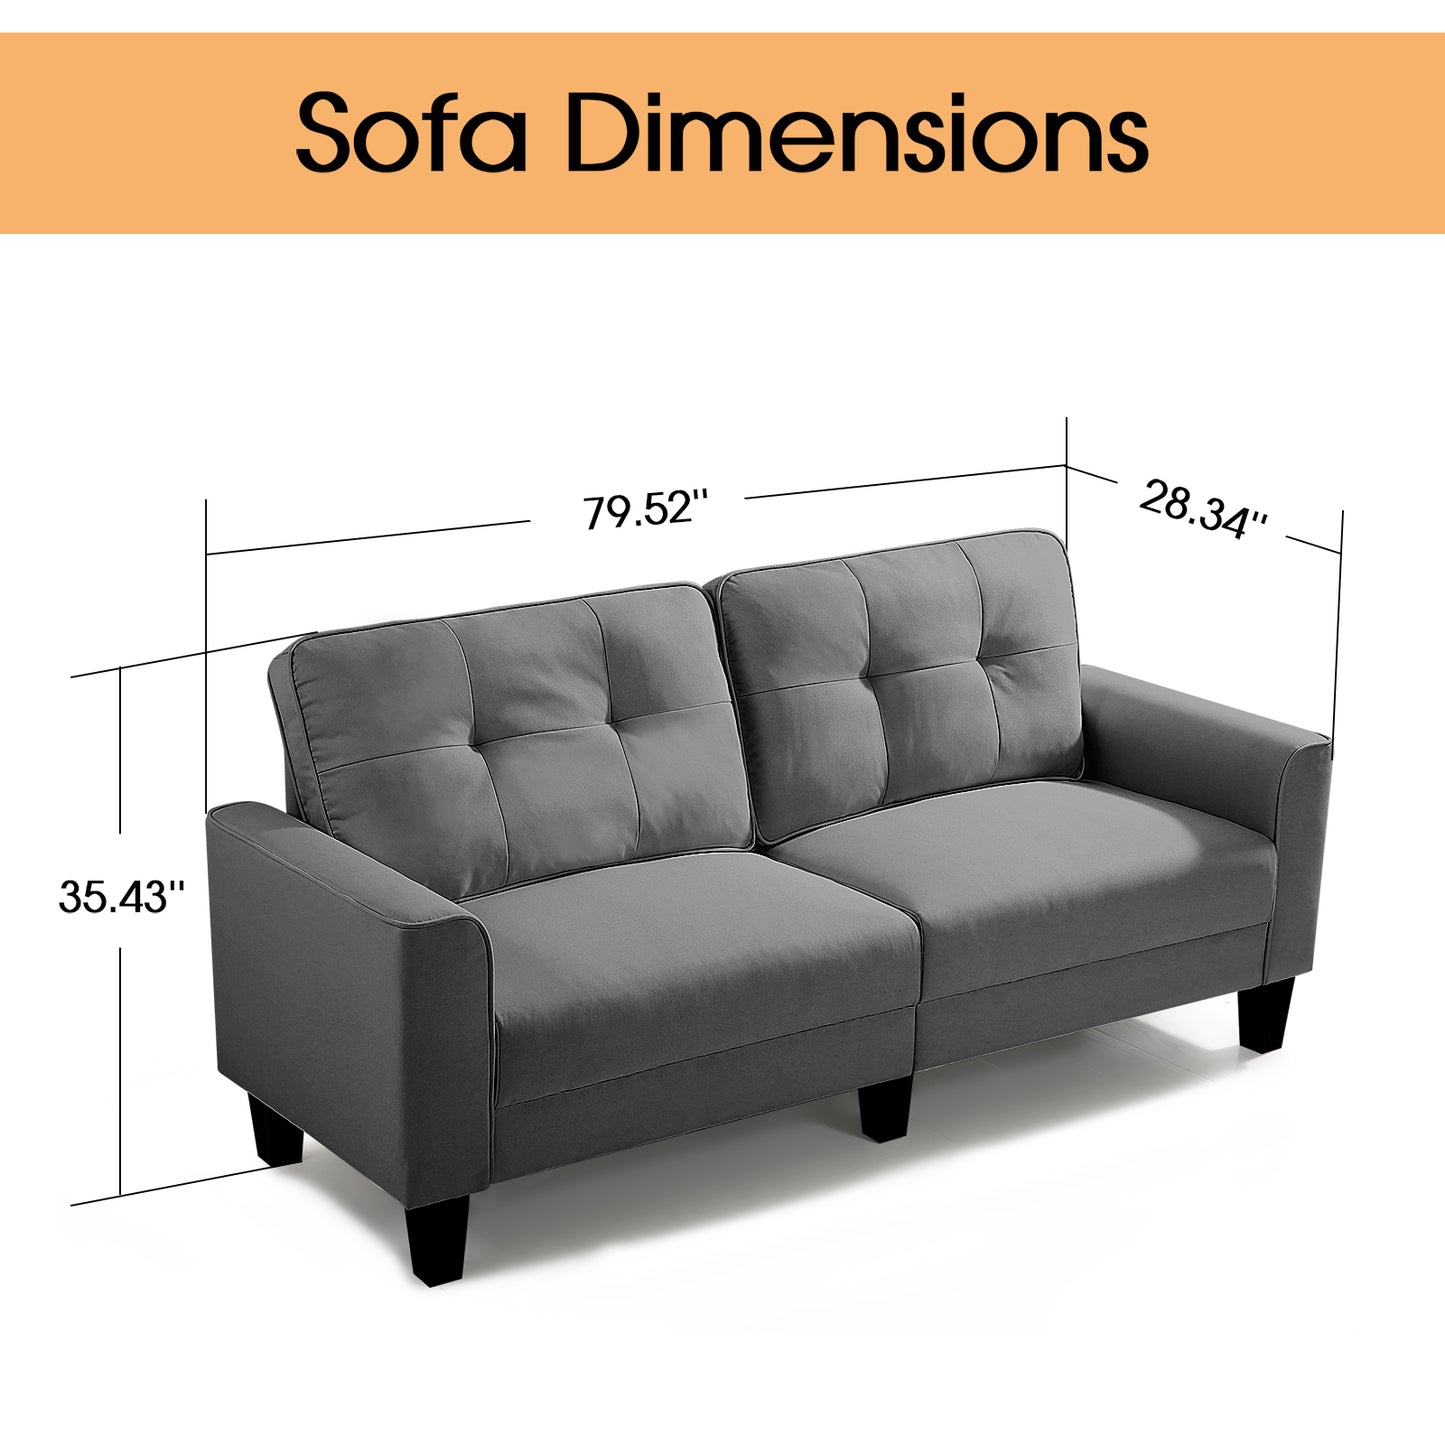 3-Seat Sofa,Soft and Comfortable,Suitable for Living Room, Bedroom, Apartments Small Sofa